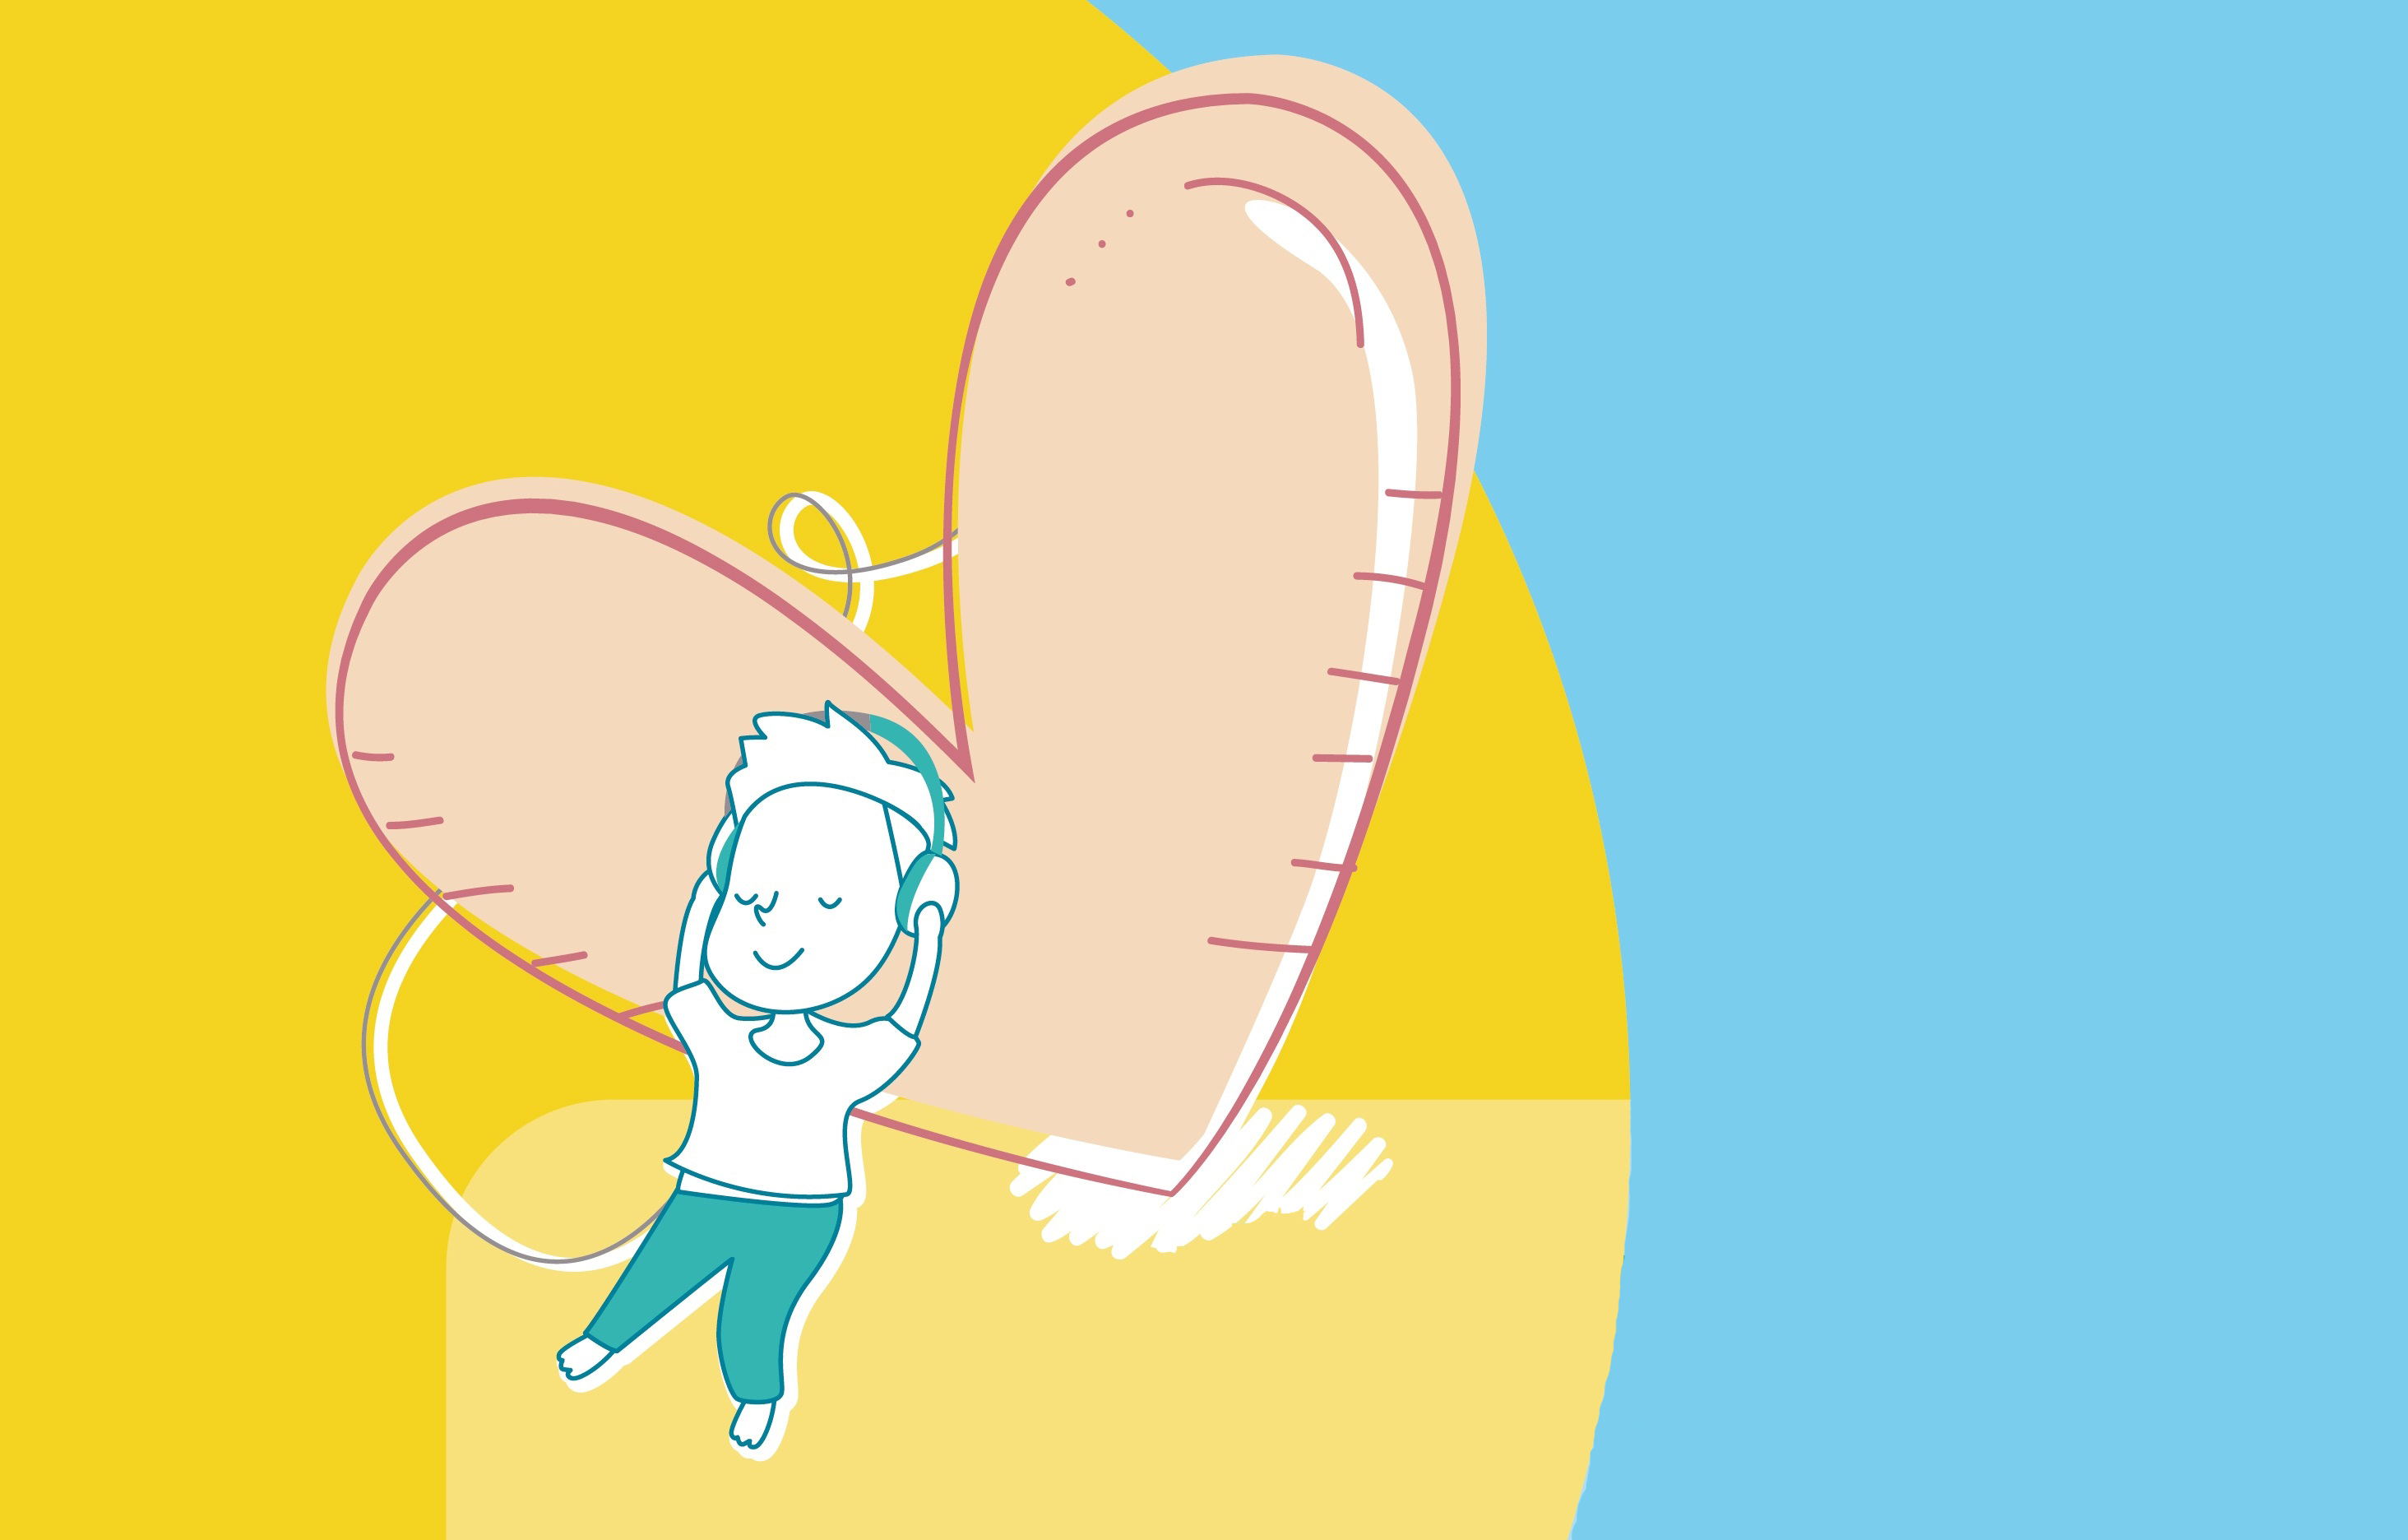 Image of a little boy listening to music with a headphone and smiling with a content face. The background is split into bright yellow on the left and light blue on the right. 